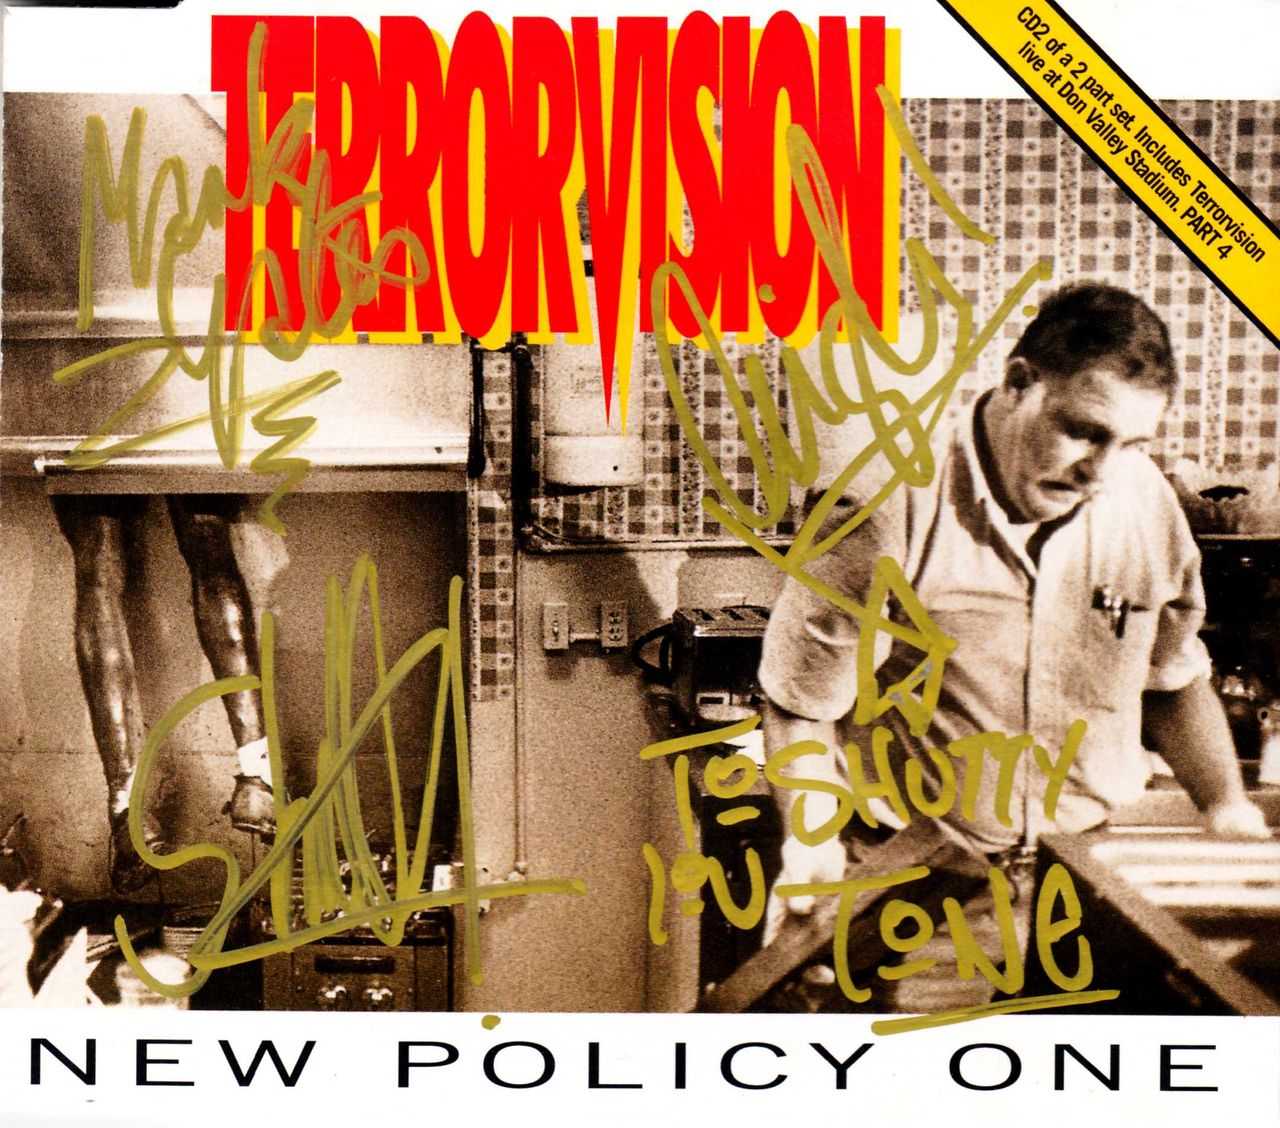 Terrorvision New Policy One - Part 2 - Autographed UK CD single (CD5 / 5") CDVEGAS4